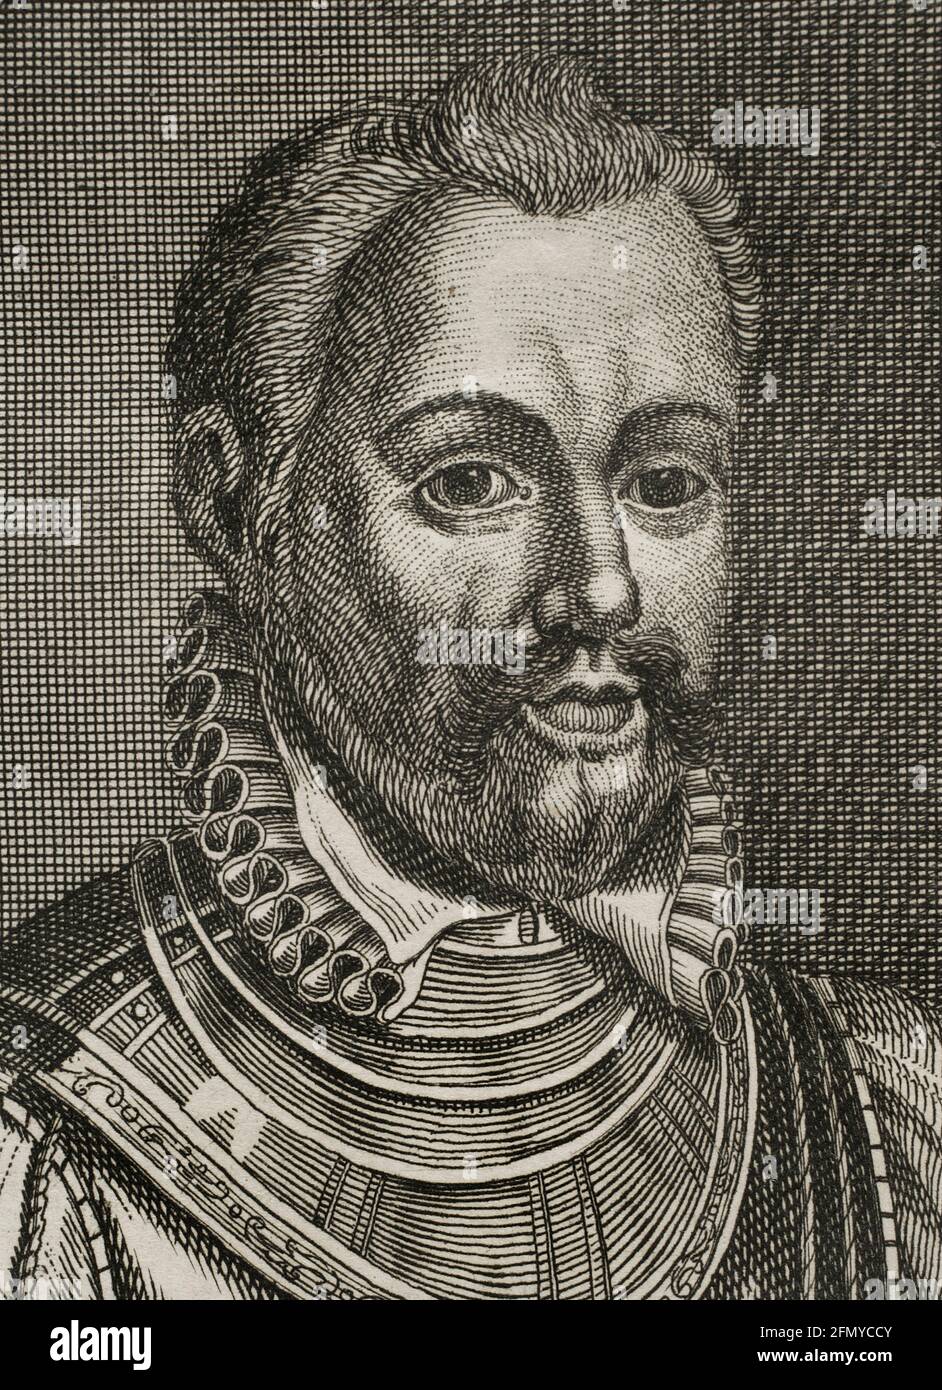 Maximilien de Henin, 3rd count of Boussu (1542-1578). Military and statesman from the Habsburg Netherlands. Engraving. Detail. Wars of Flanders. Edition published in Antwerp, 1748. Stock Photo